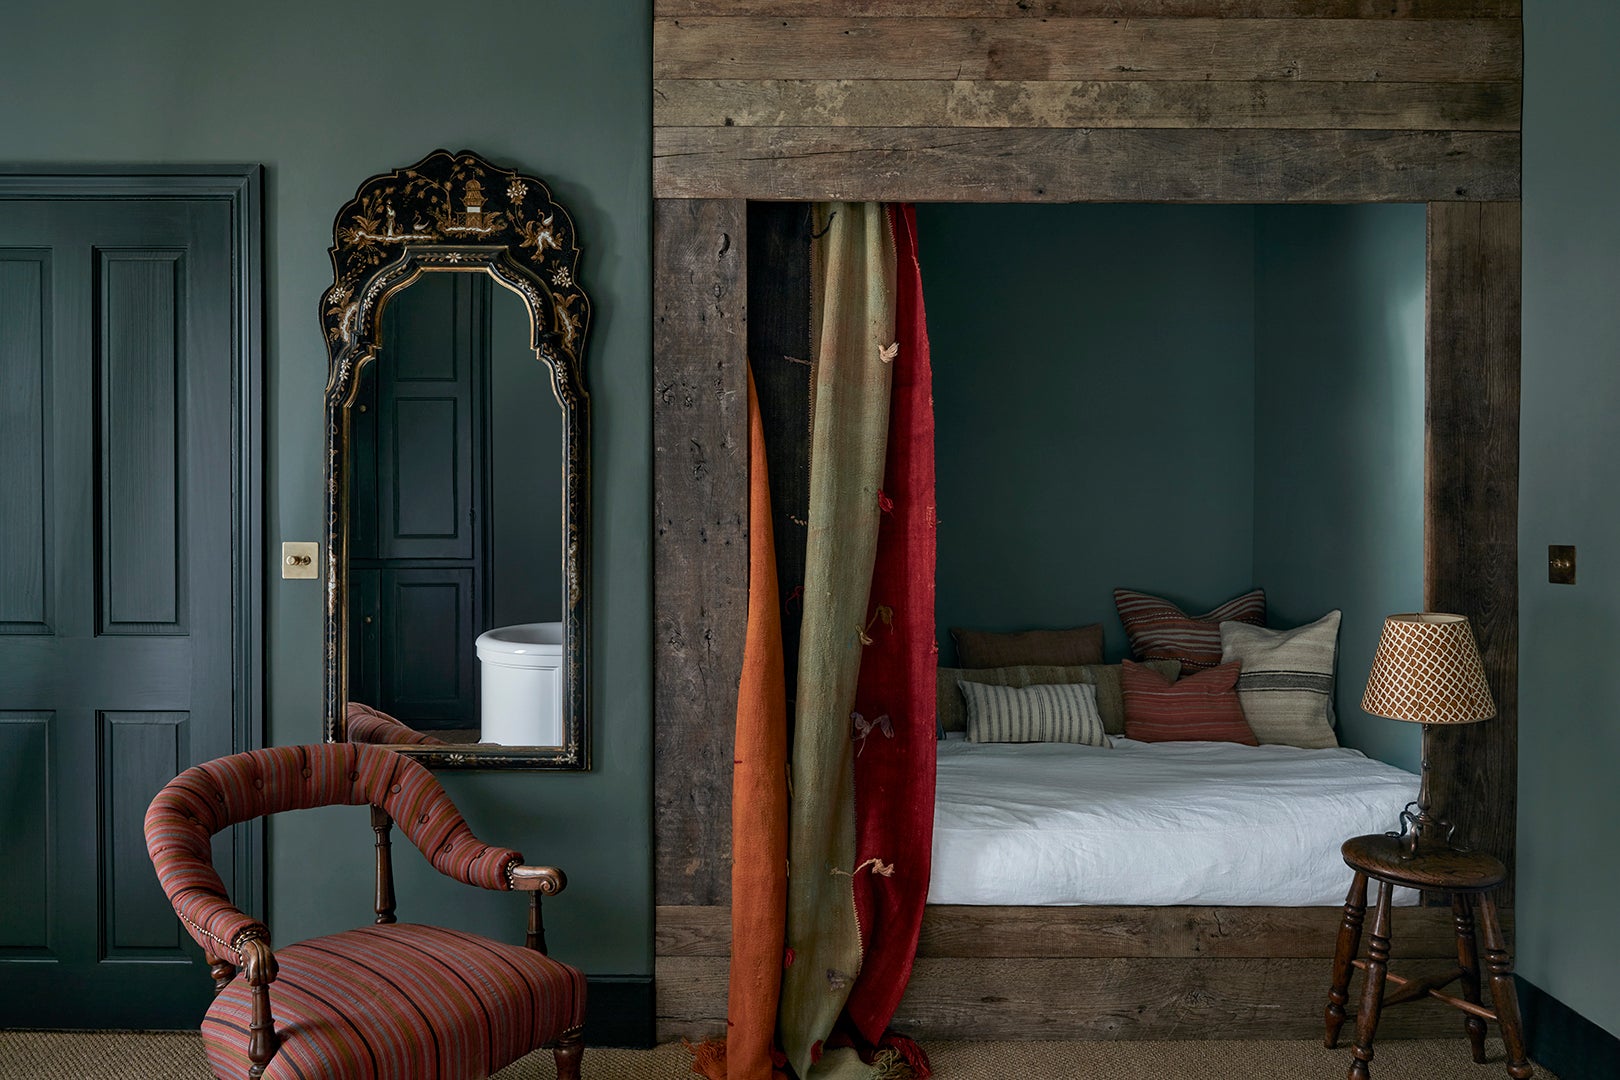 Look forward to knock-out interiors from the former European design director of Soho House